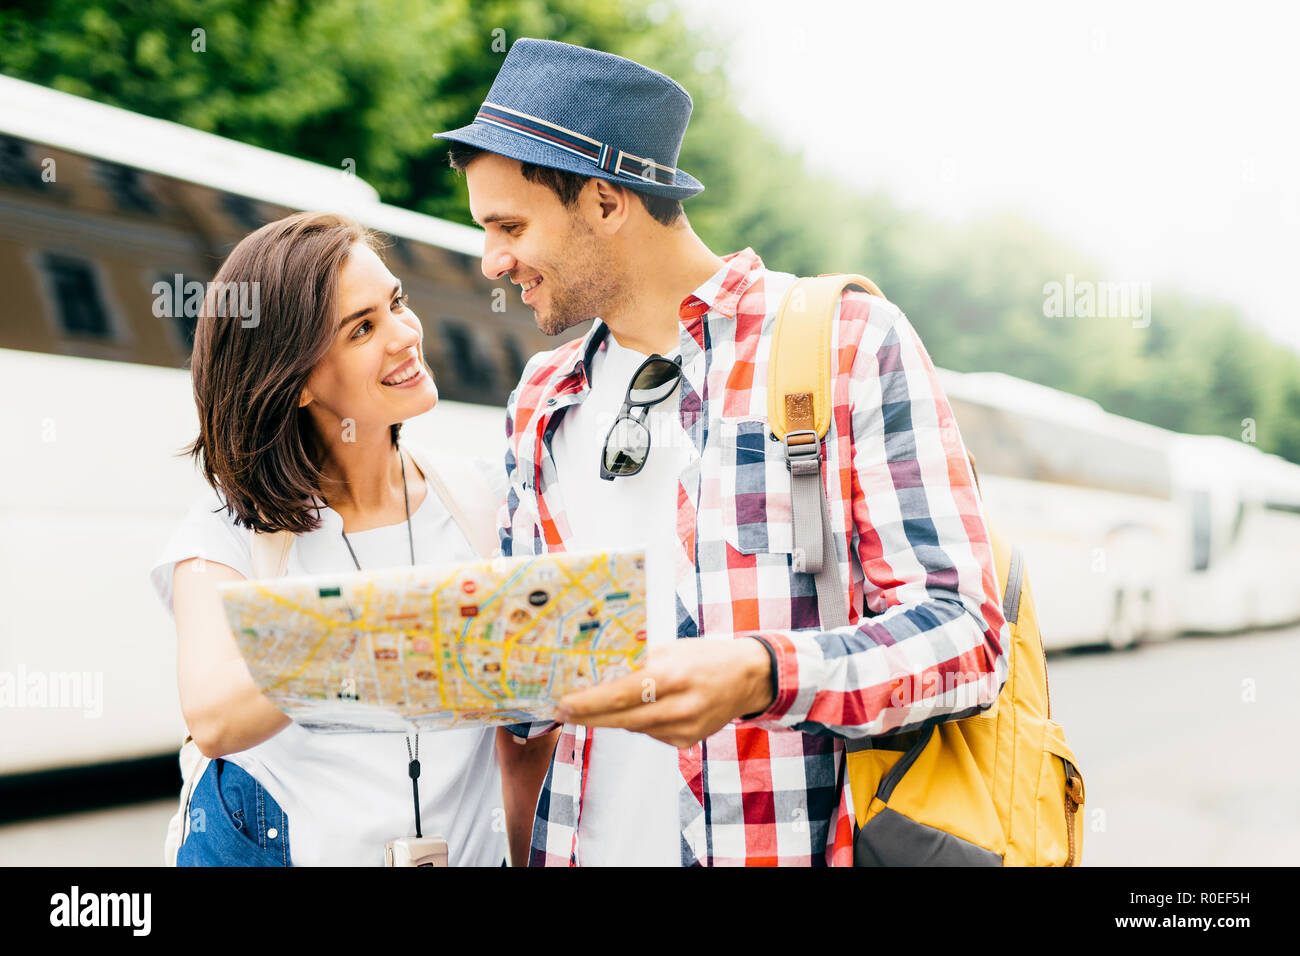 Attractive male and female tourists, being in unfamiliar place, holding map or city guide, deciding where to go first, looking happily at each other,  Stock Photo